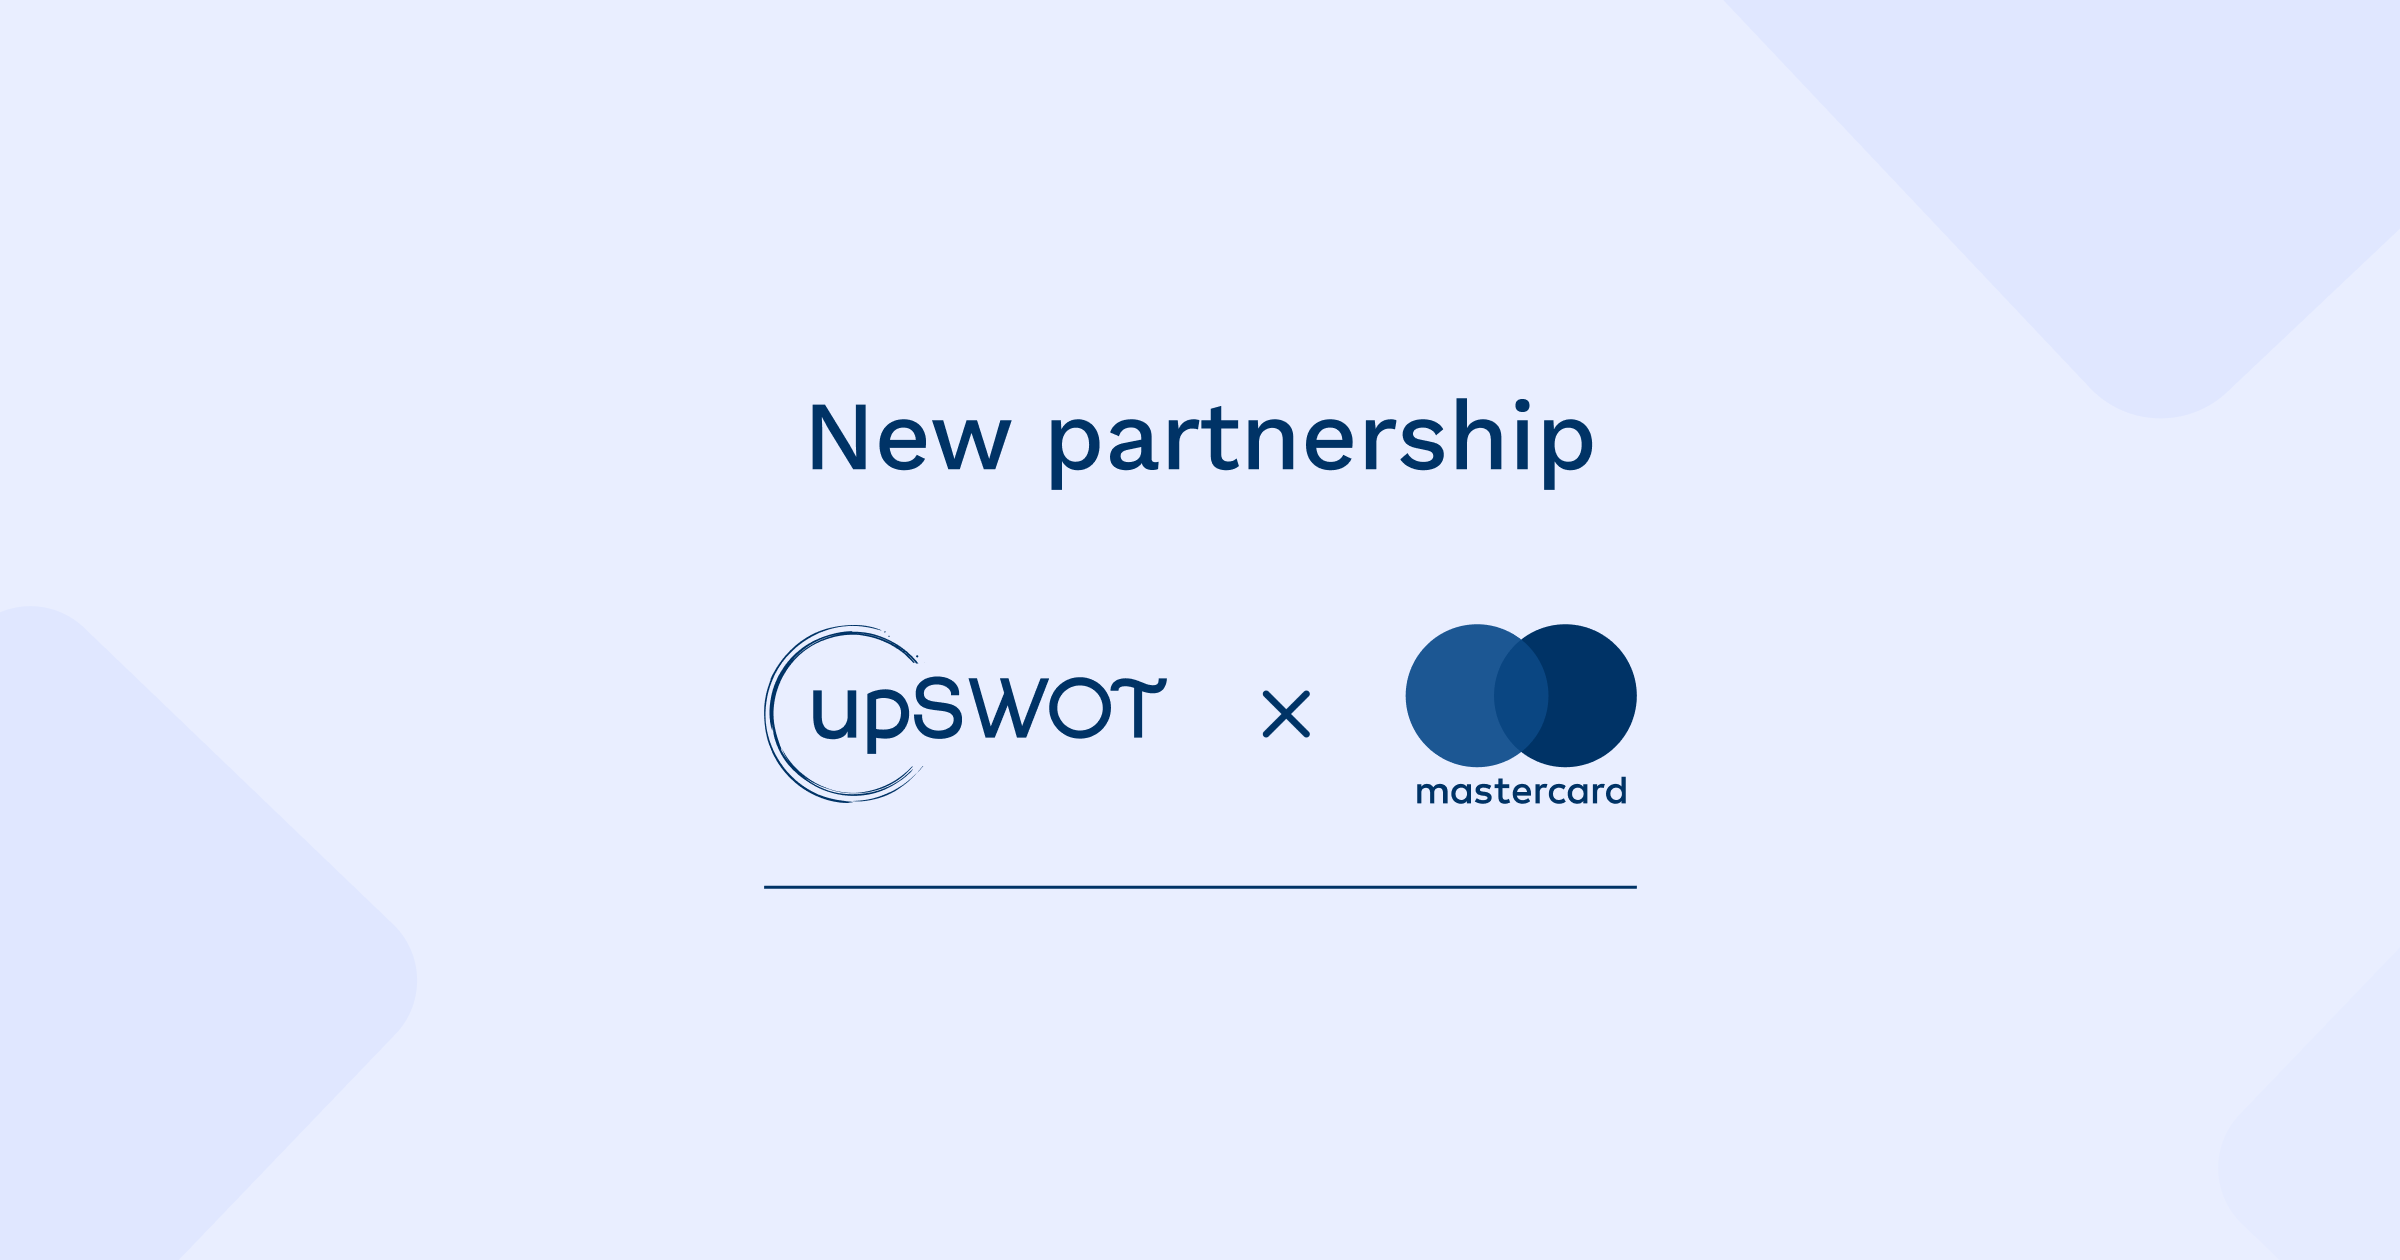 upSWOT and Mastercard Are Partnering on Open Banking Data Analytics to Deliver Embedded Finance and Underwriting Tools